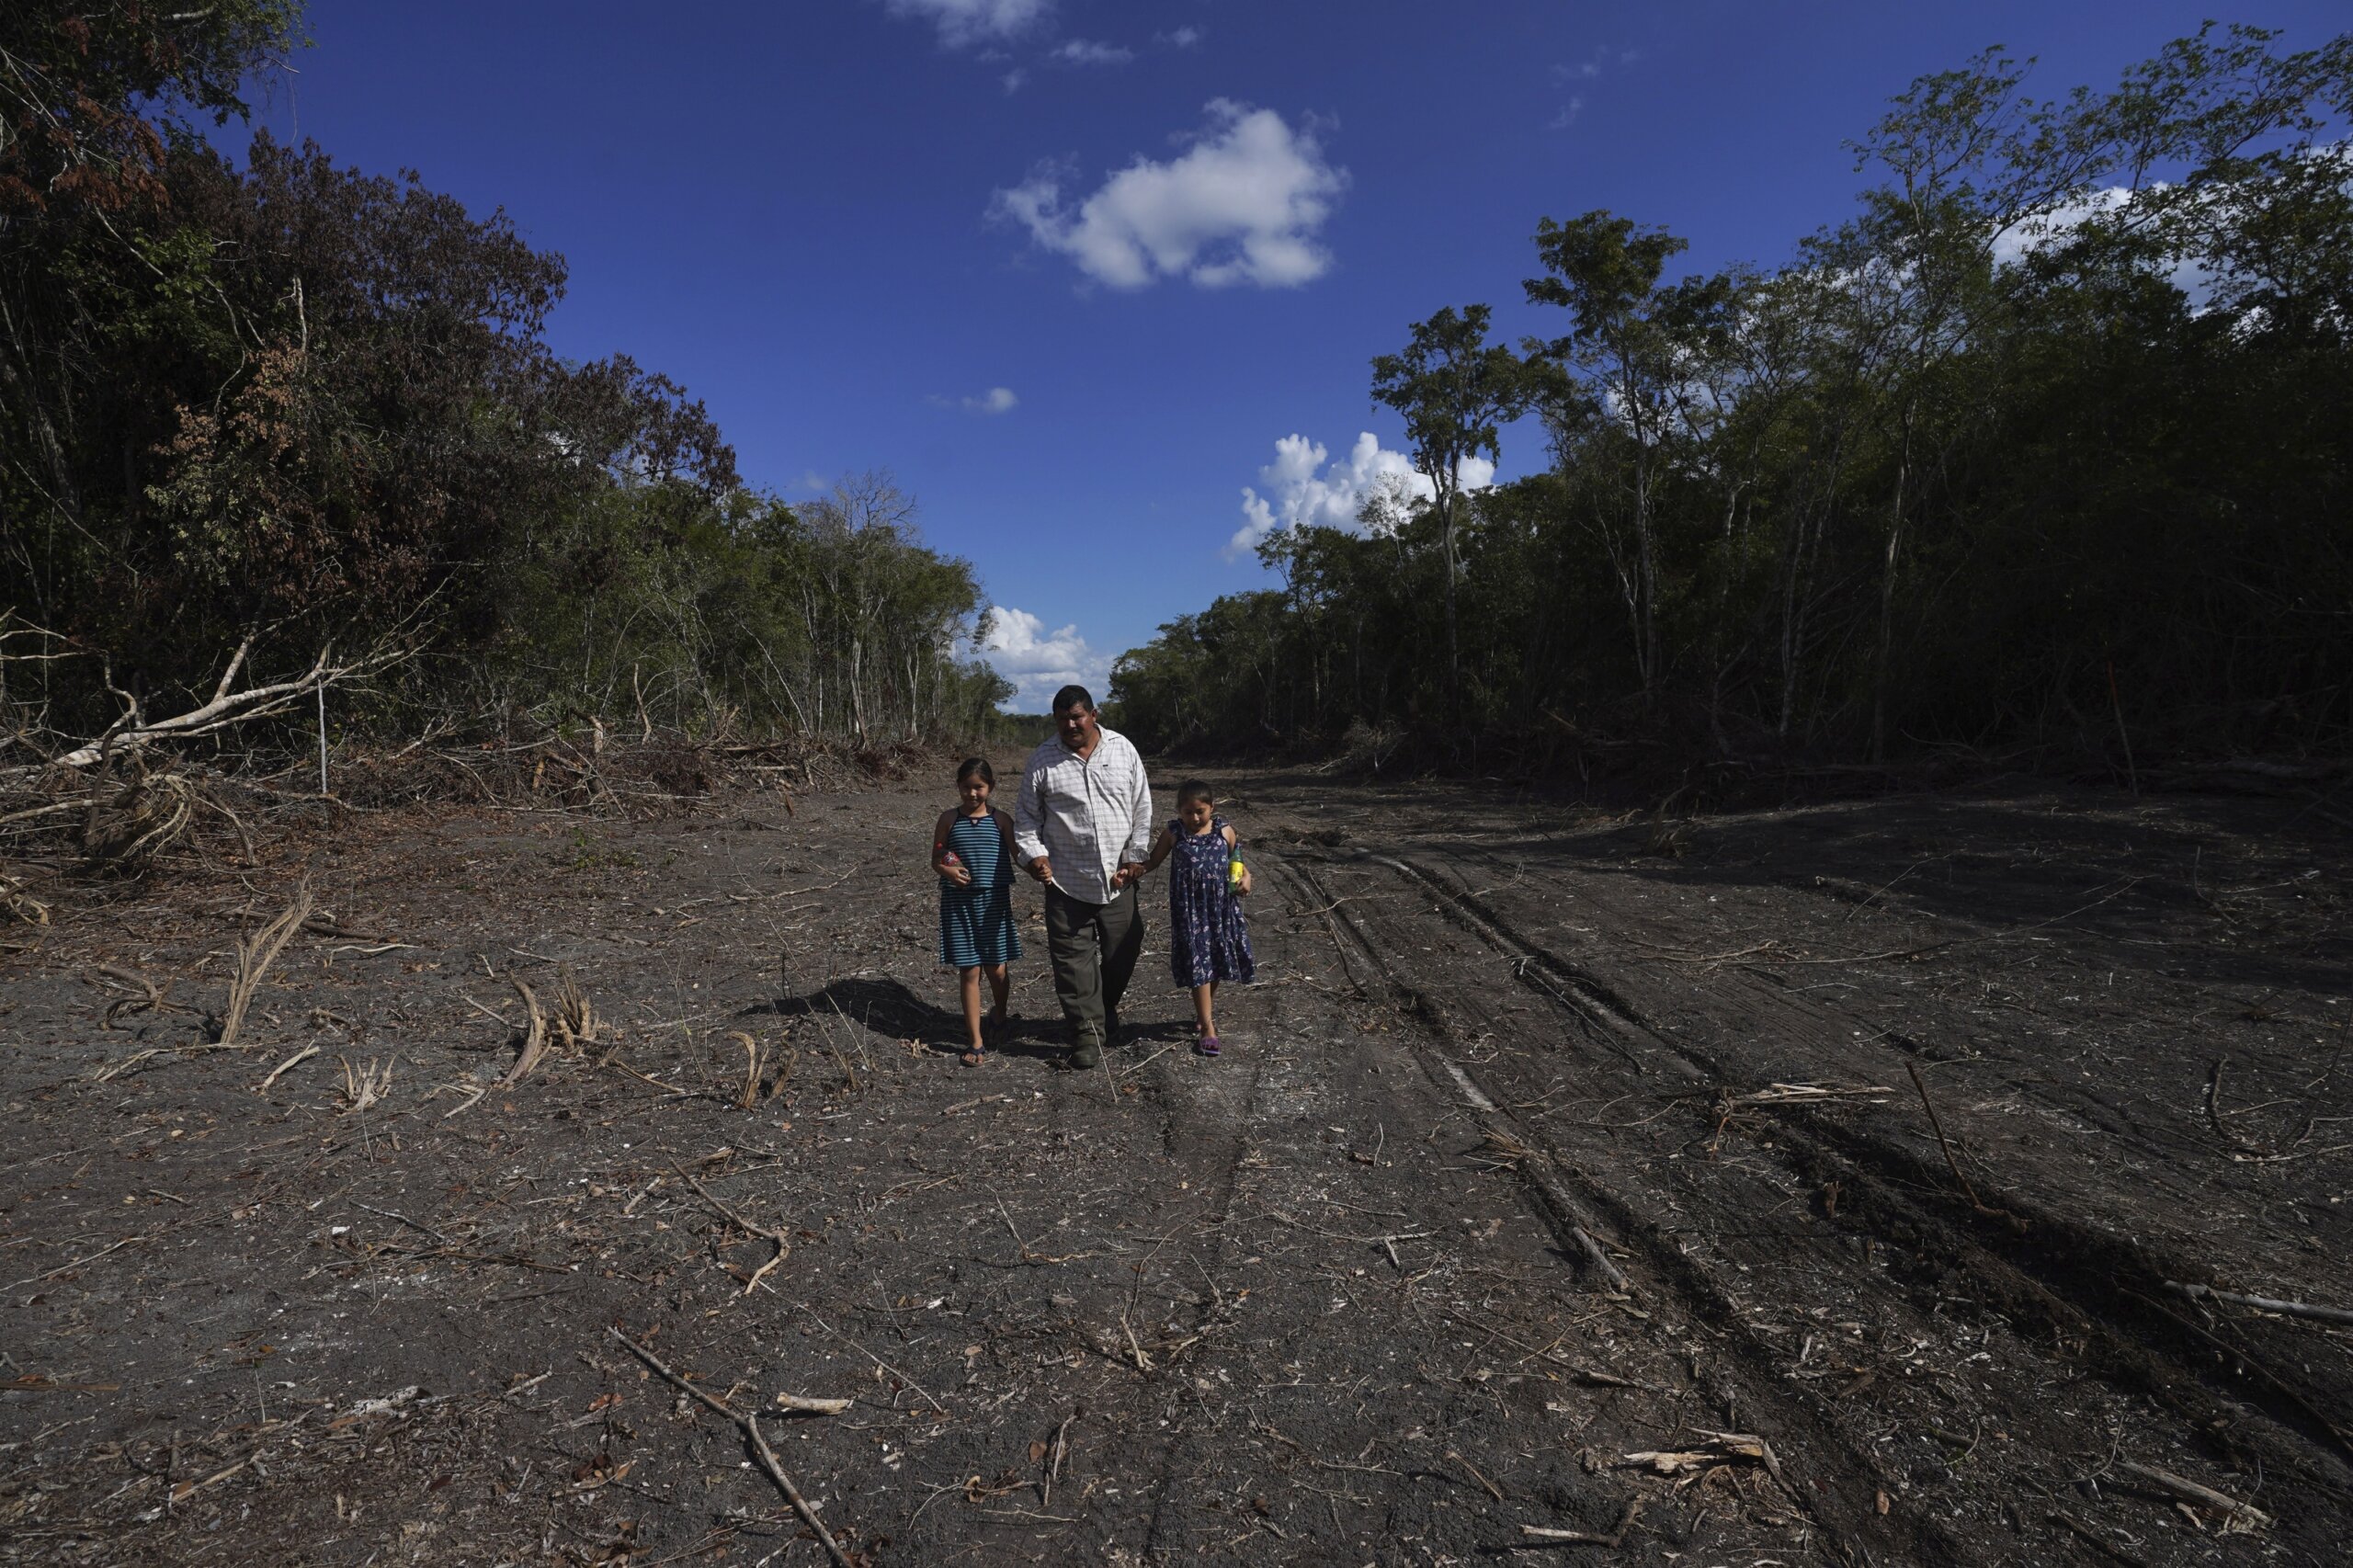 In Mexico, worry that Maya Train will destroy jungle